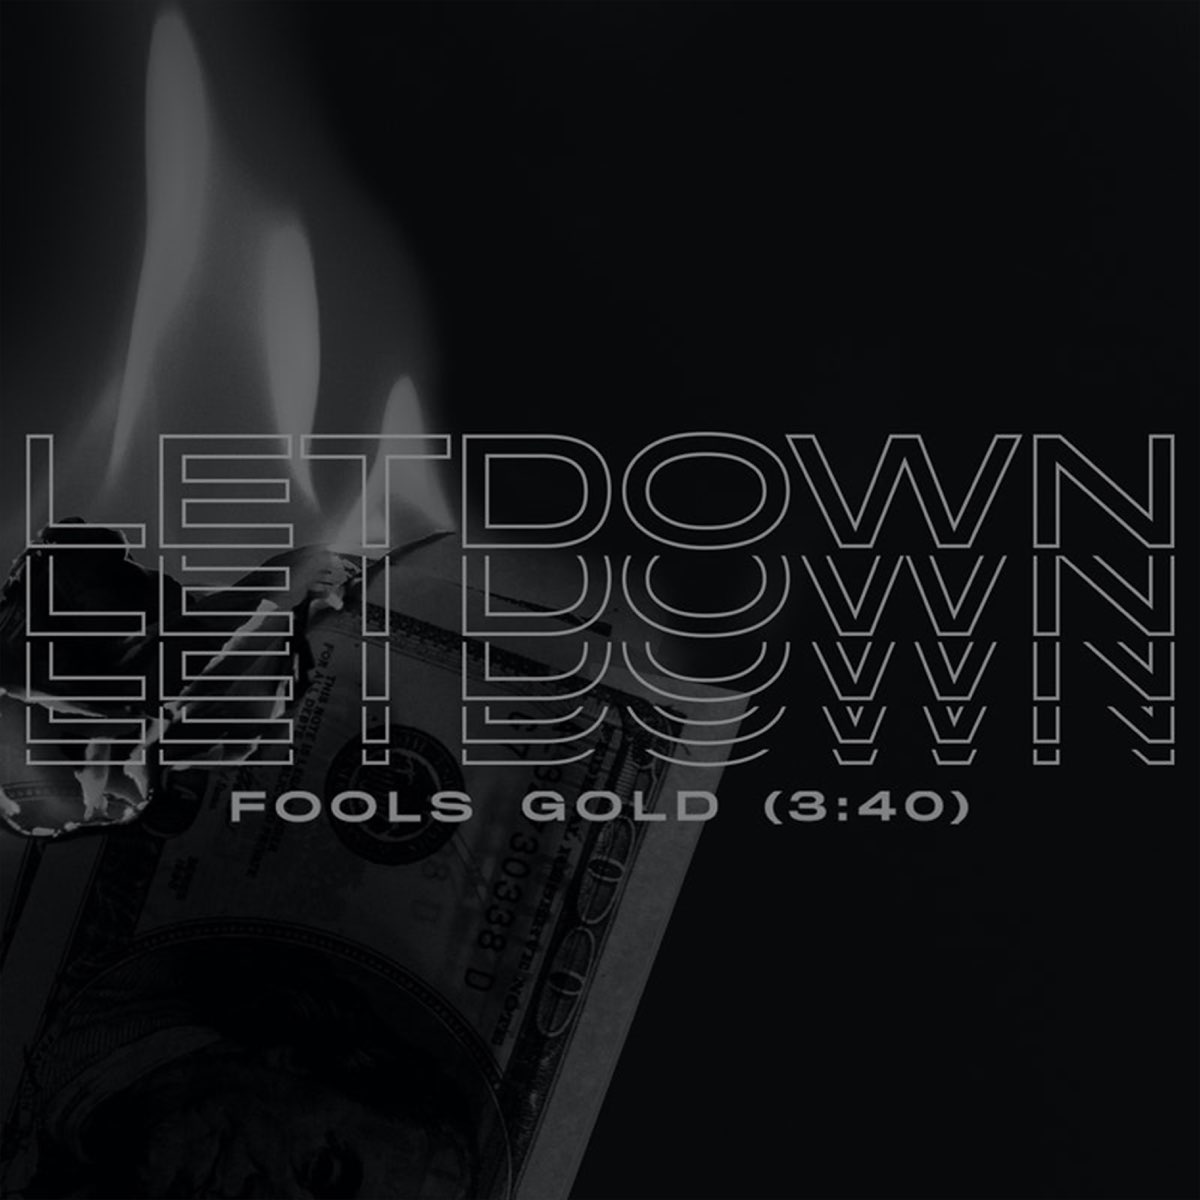 Gold mp3. Fool's Gold letdown.. Christie Fools Gold. Рок letdown участники. Fools Gold Cover.